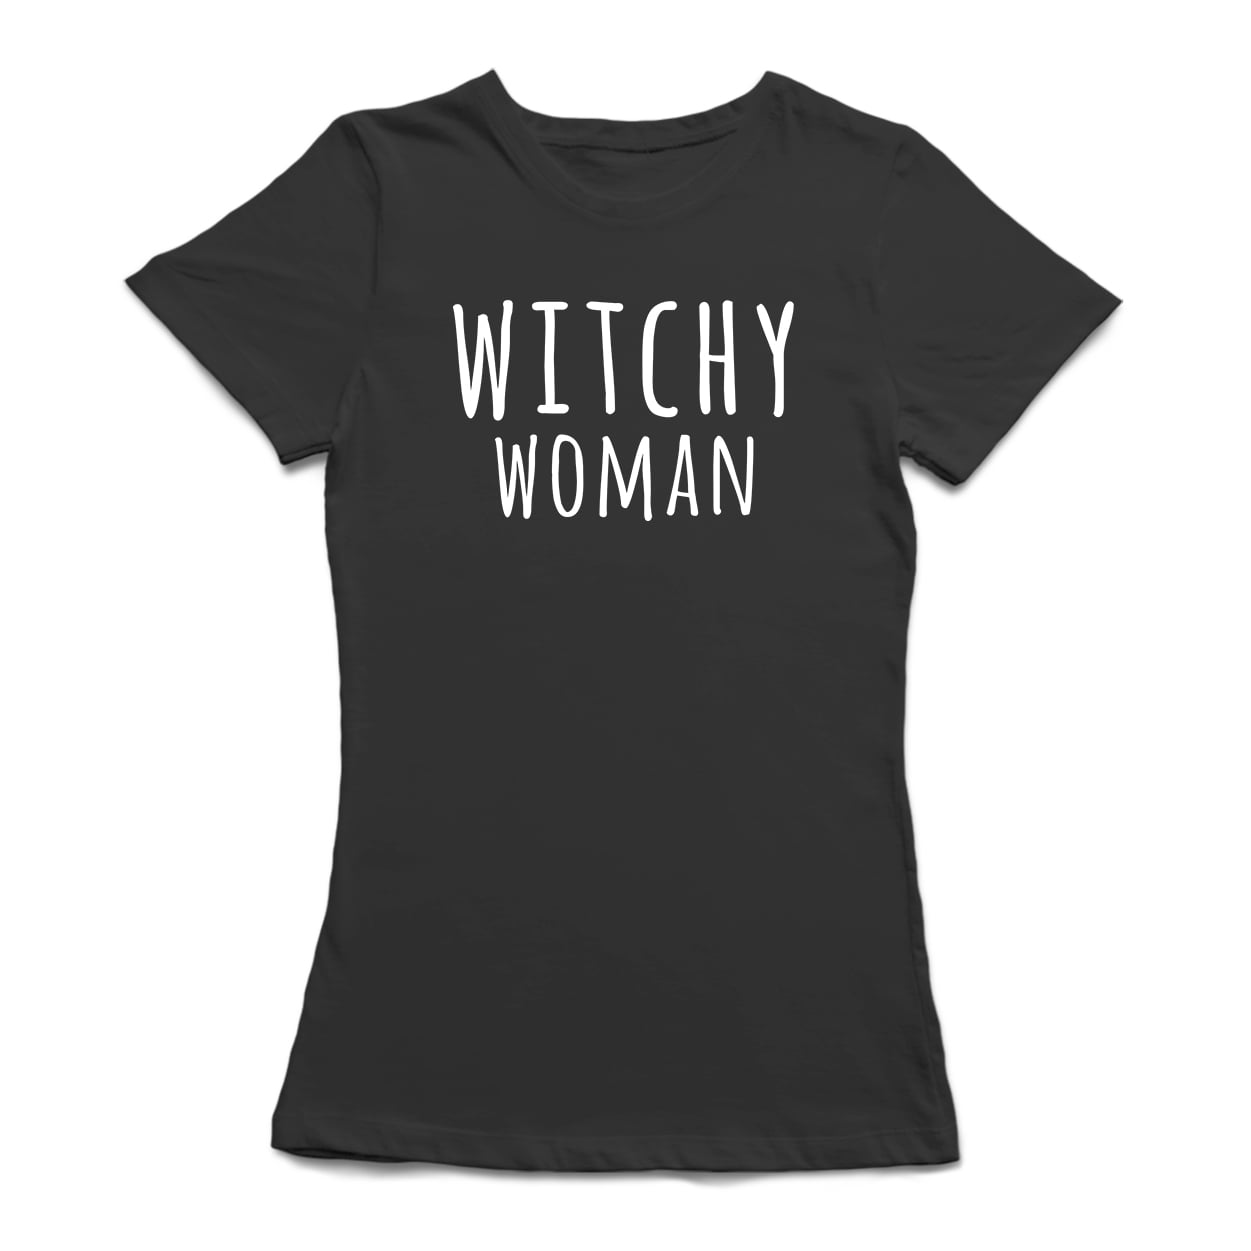 Witchy Woman Unisex Tshirt